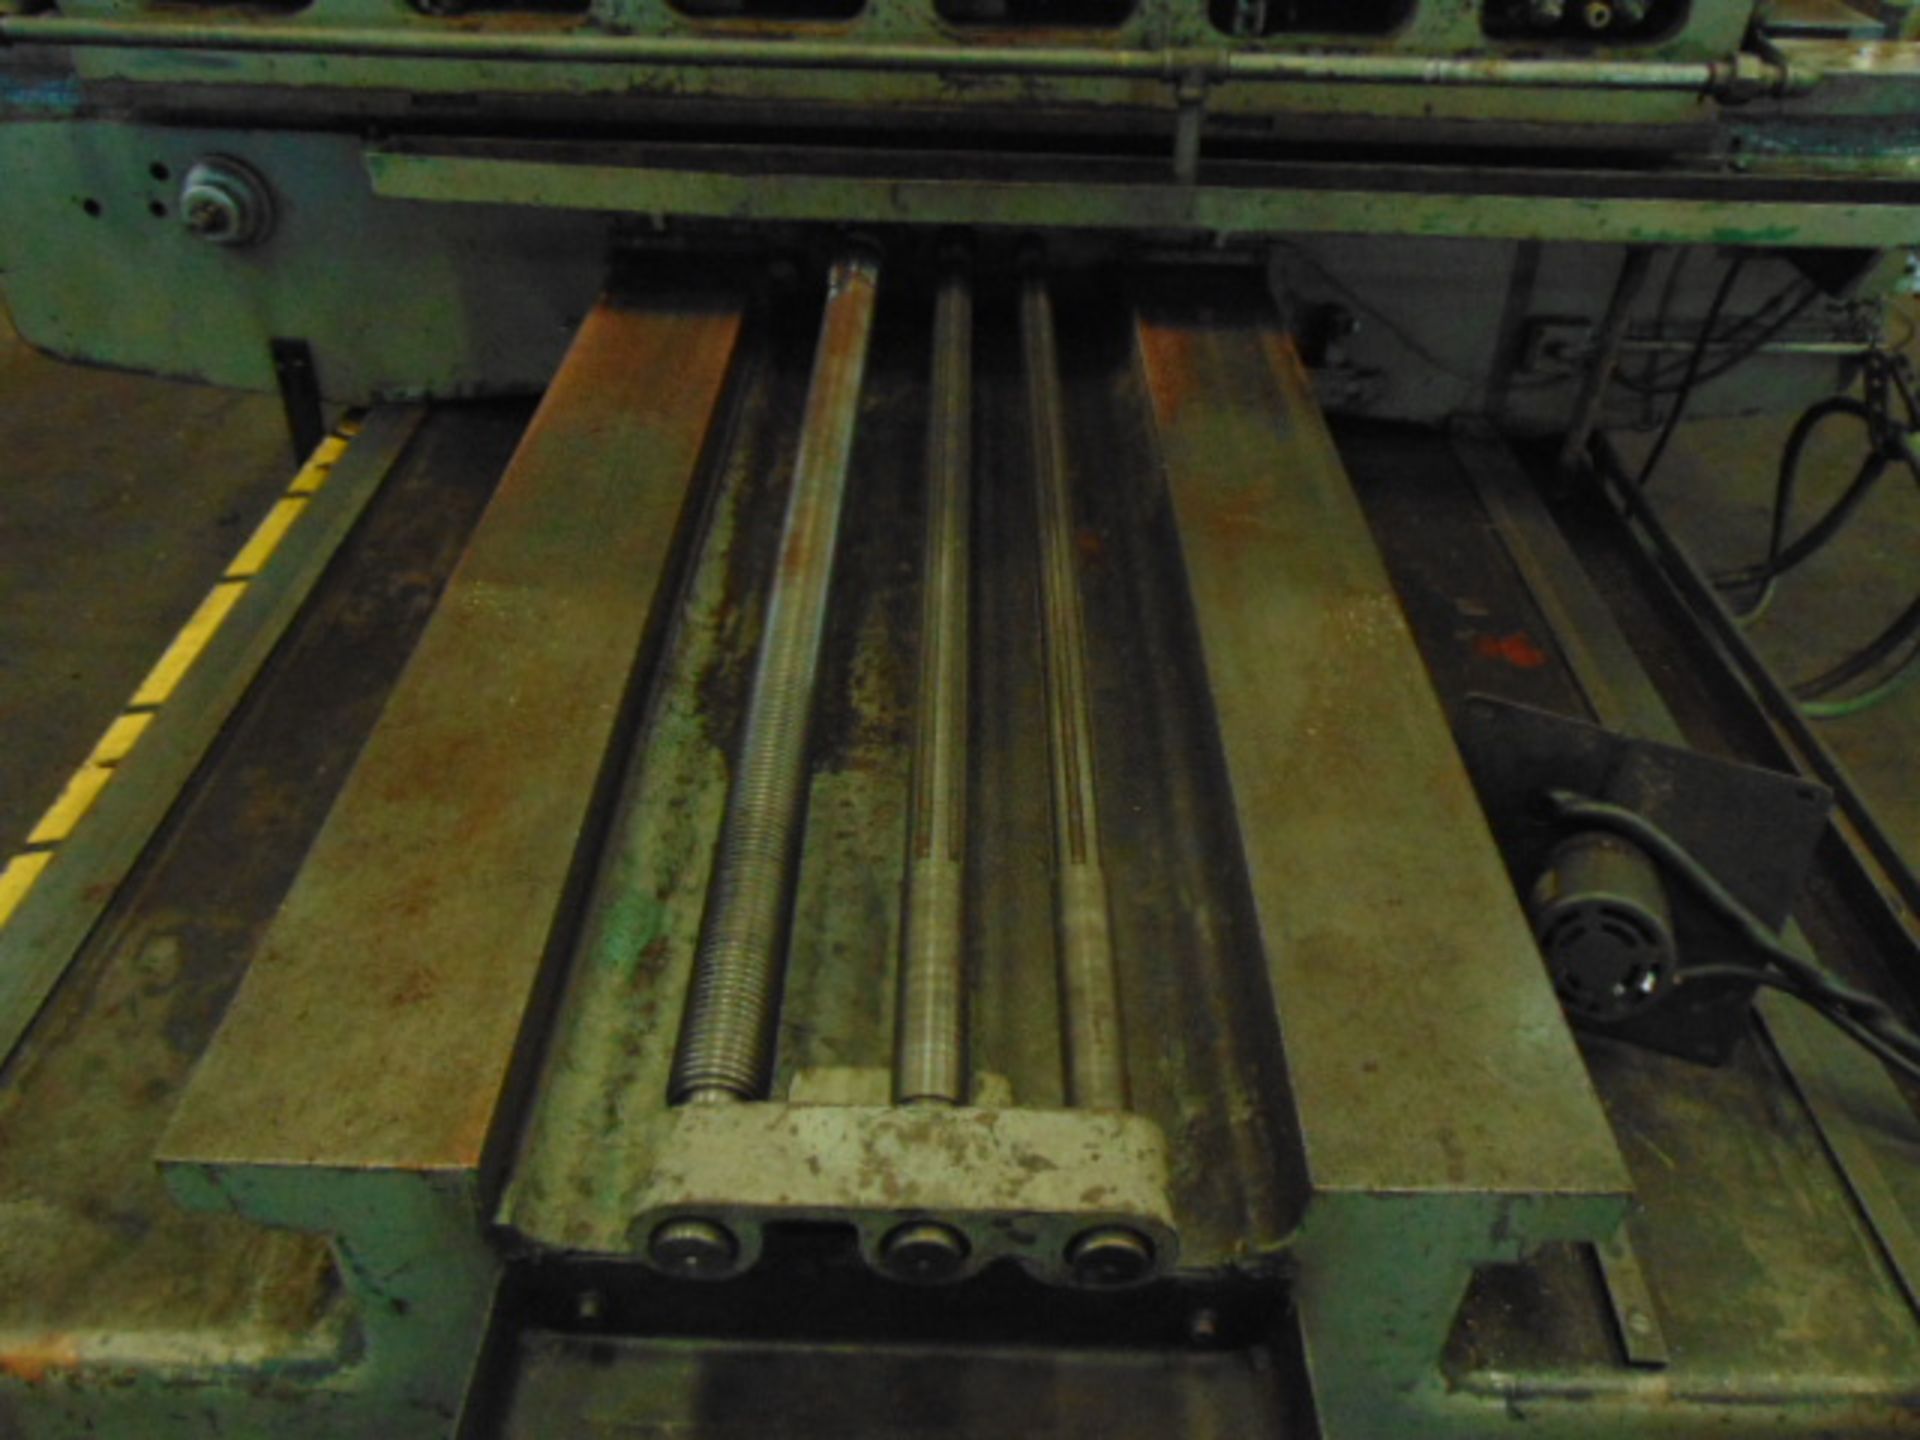 TABLE TYPE HORIZONTAL BORING MILL, LUCAS MDL. 428-60, 40" x 74" tbl., 60" cross travel, approx. - Image 14 of 16